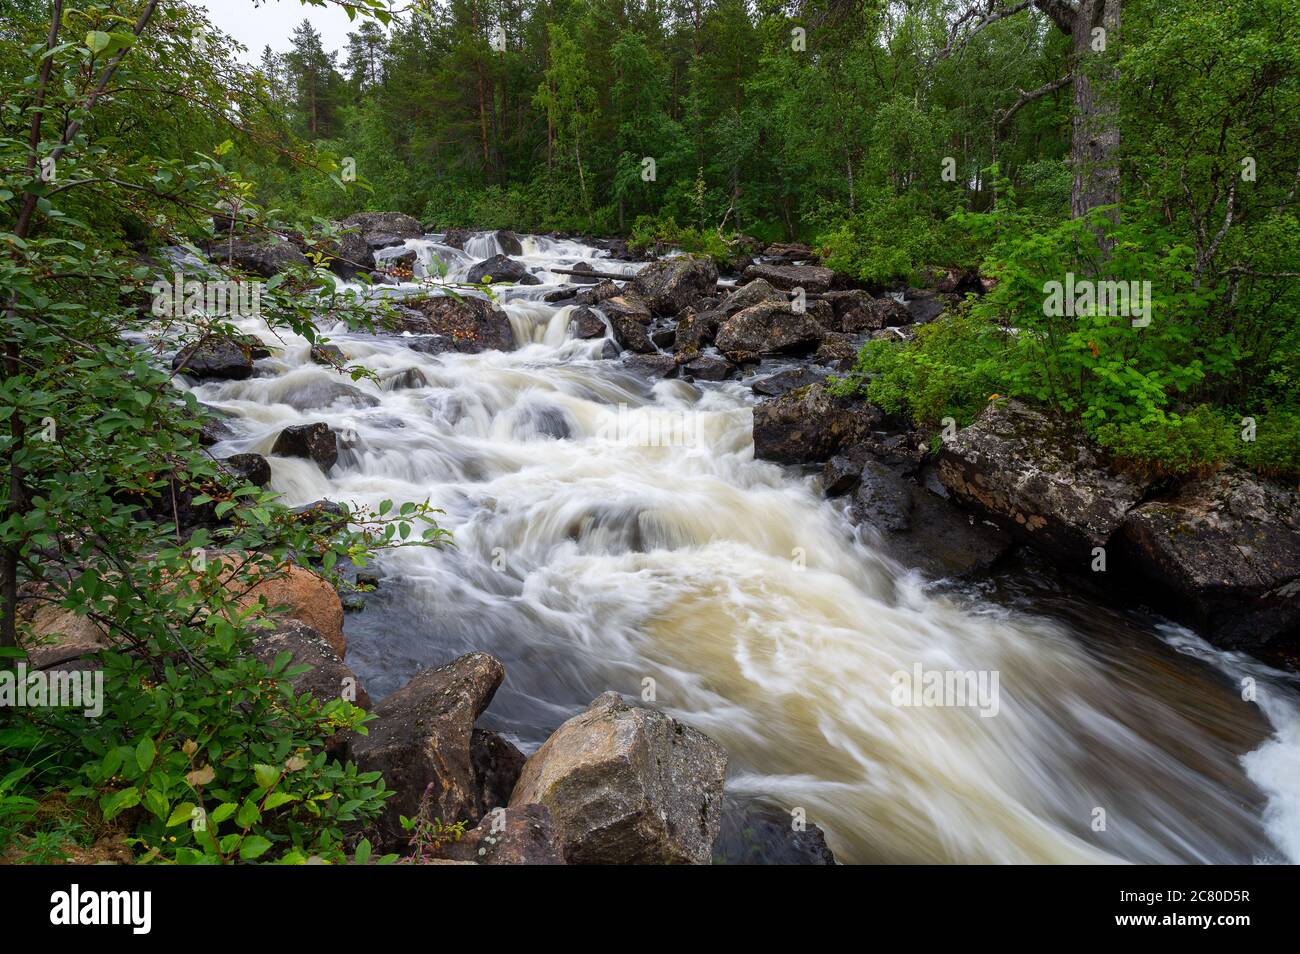 A beautiful scene of a small stream with white waters photographed in the Lapland wilderness. Stock Photo